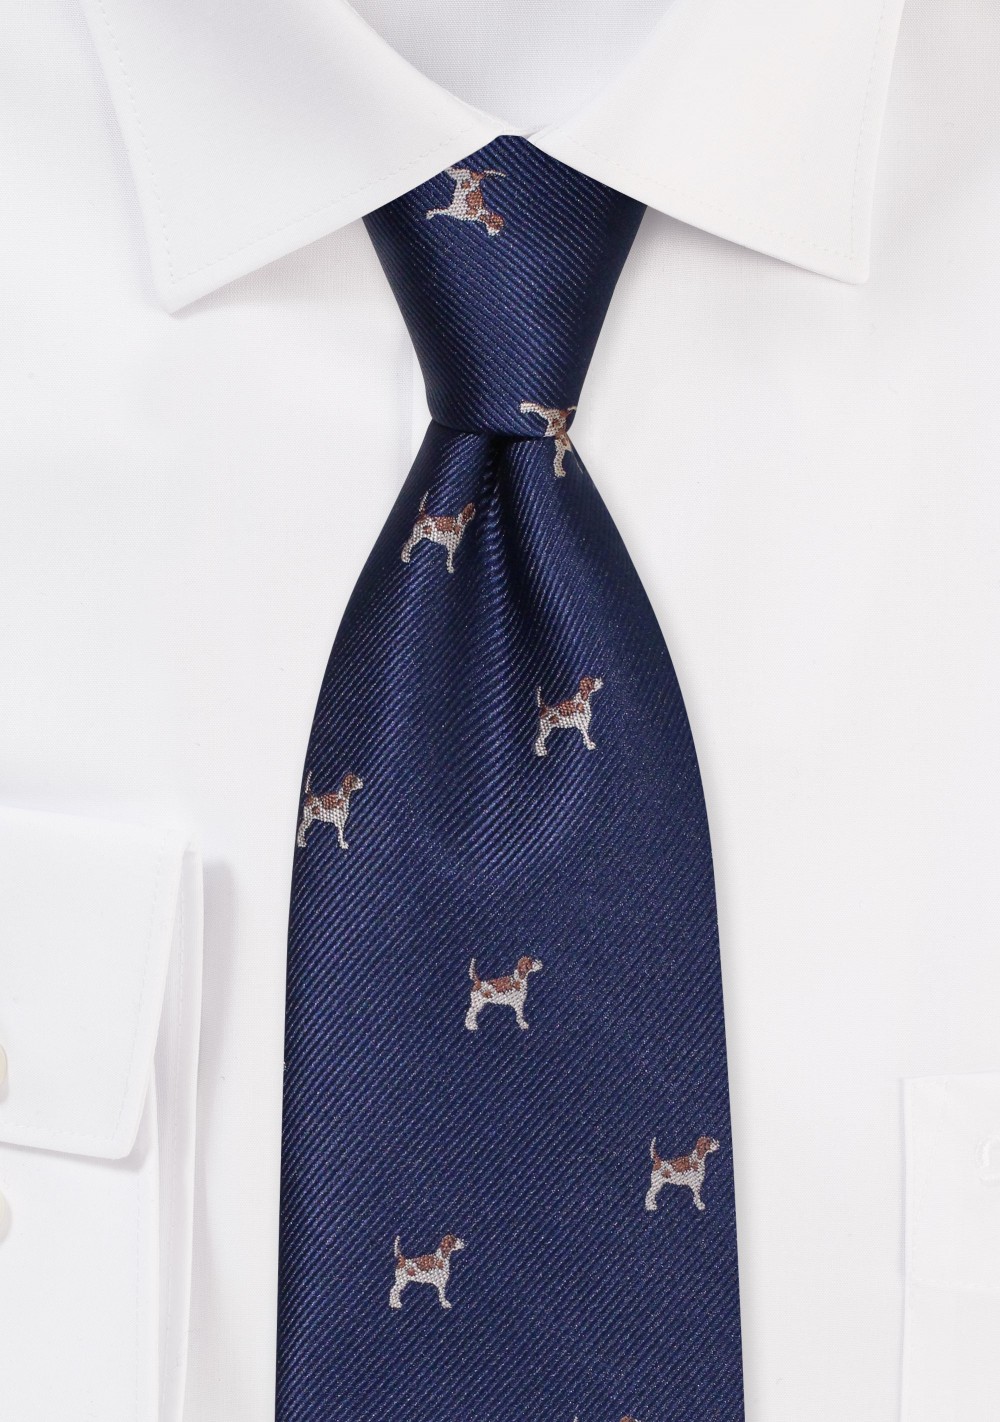 Navy Kids Tie with Embroidered Dogs